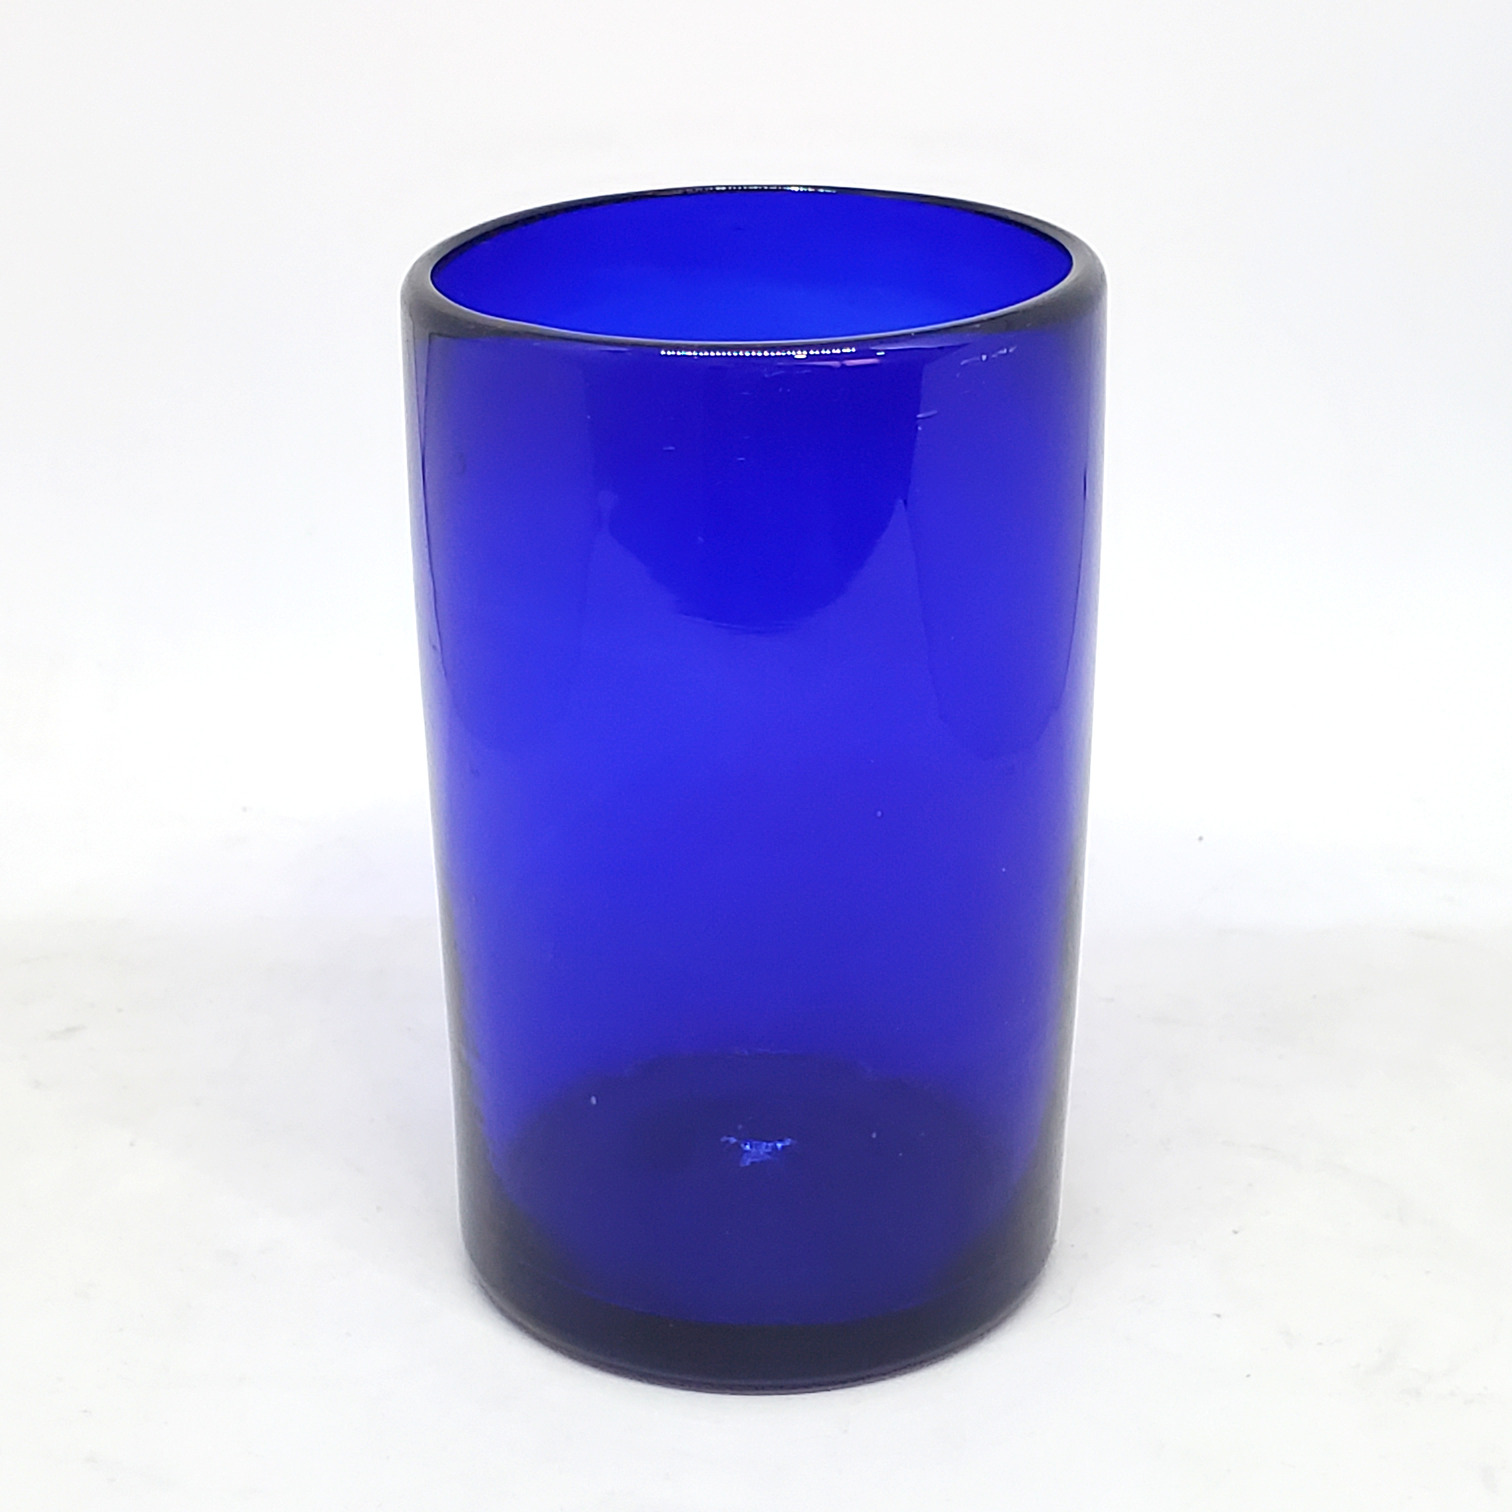 Sale Items / Solid Cobalt Blue 14 oz Drinking Glasses  / These handcrafted glasses deliver a classic touch to your favorite drink.